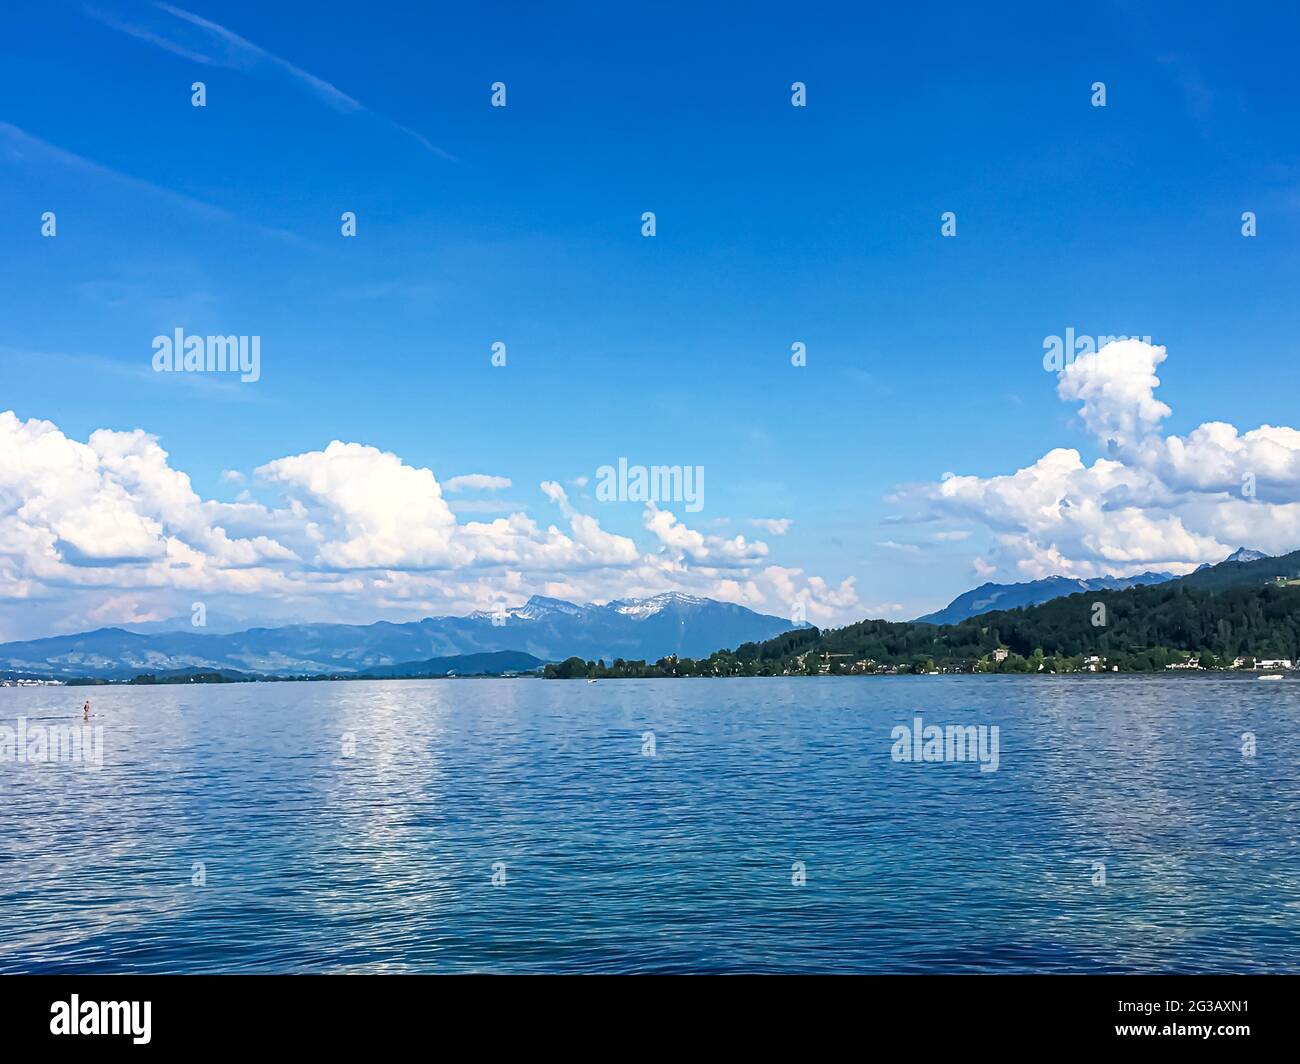 Idyllic Swiss landscape, view of lake Zurich in Richterswil, Switzerland, mountains, blue water of Zurichsee, sky as summer nature and travel Stock Photo